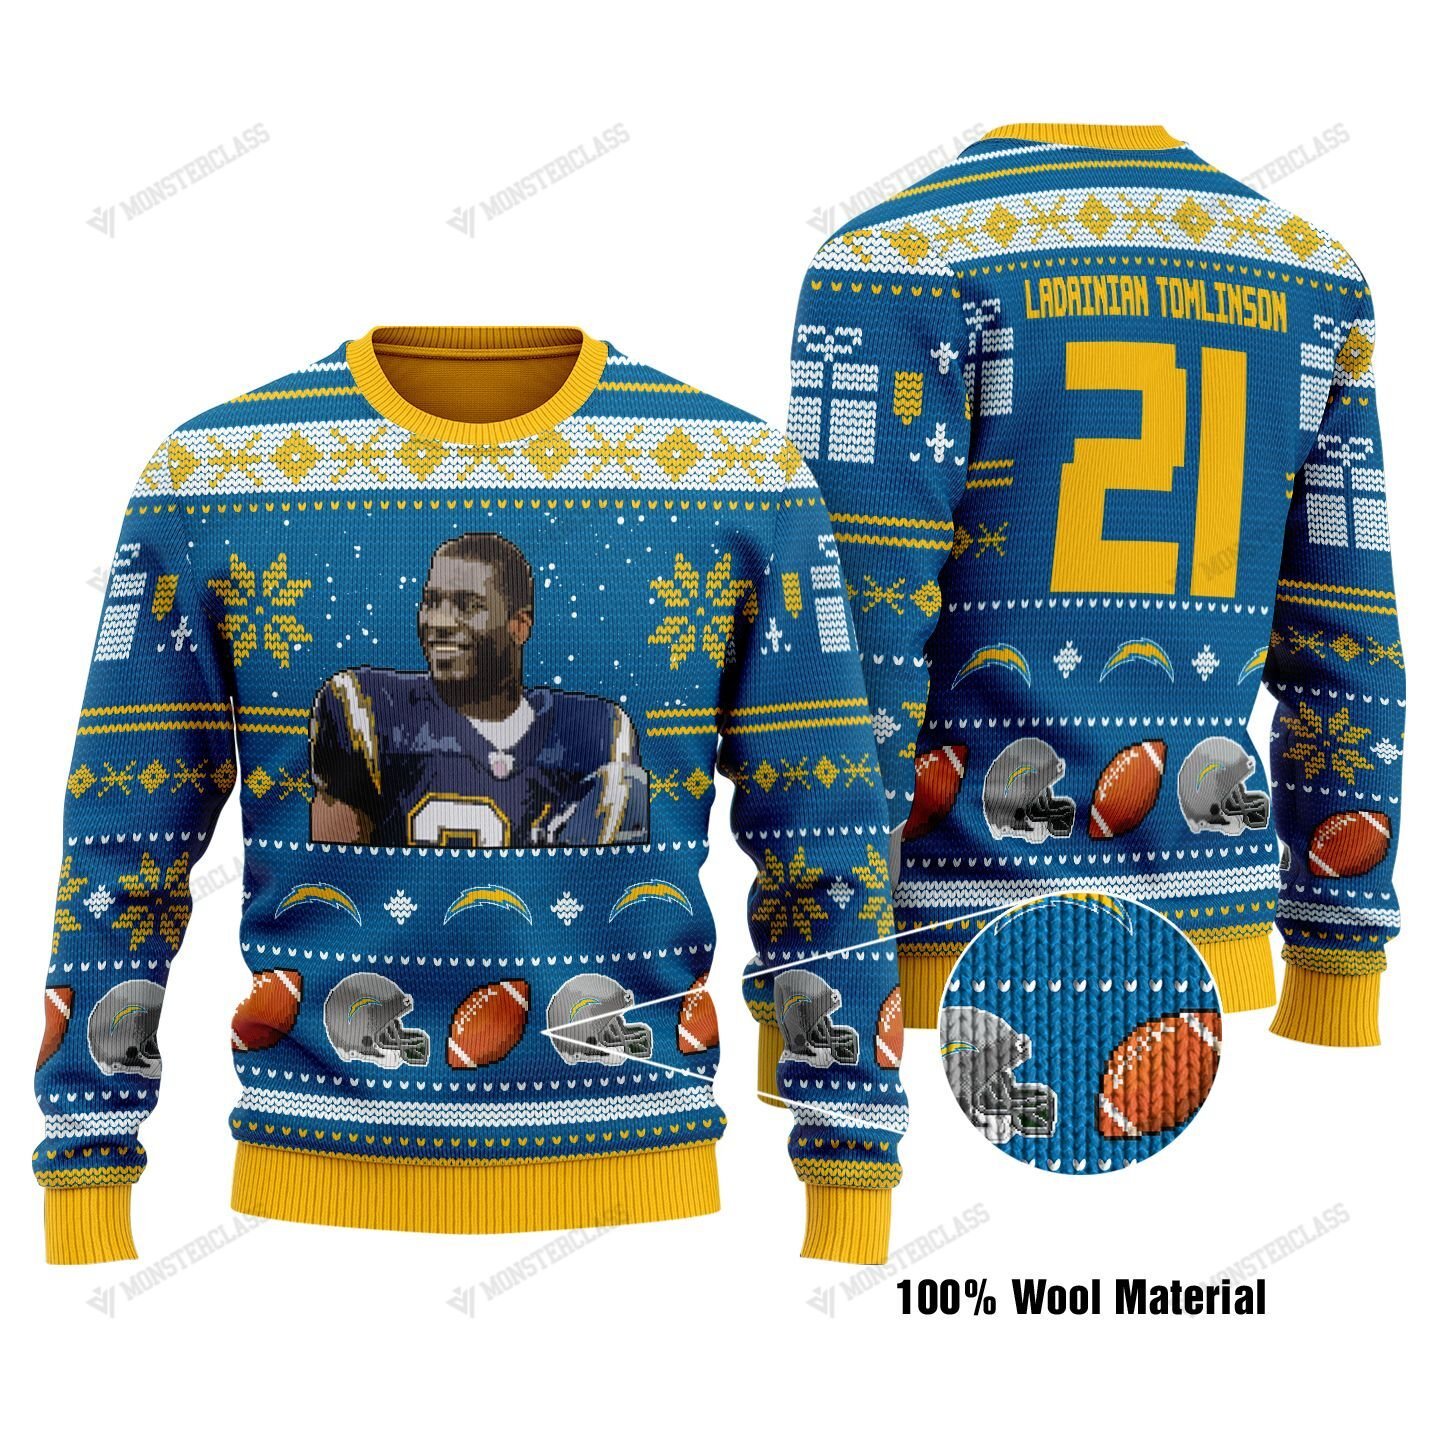 LaDainian Tomlinson Los Angeles Chargers NFL christmas sweater